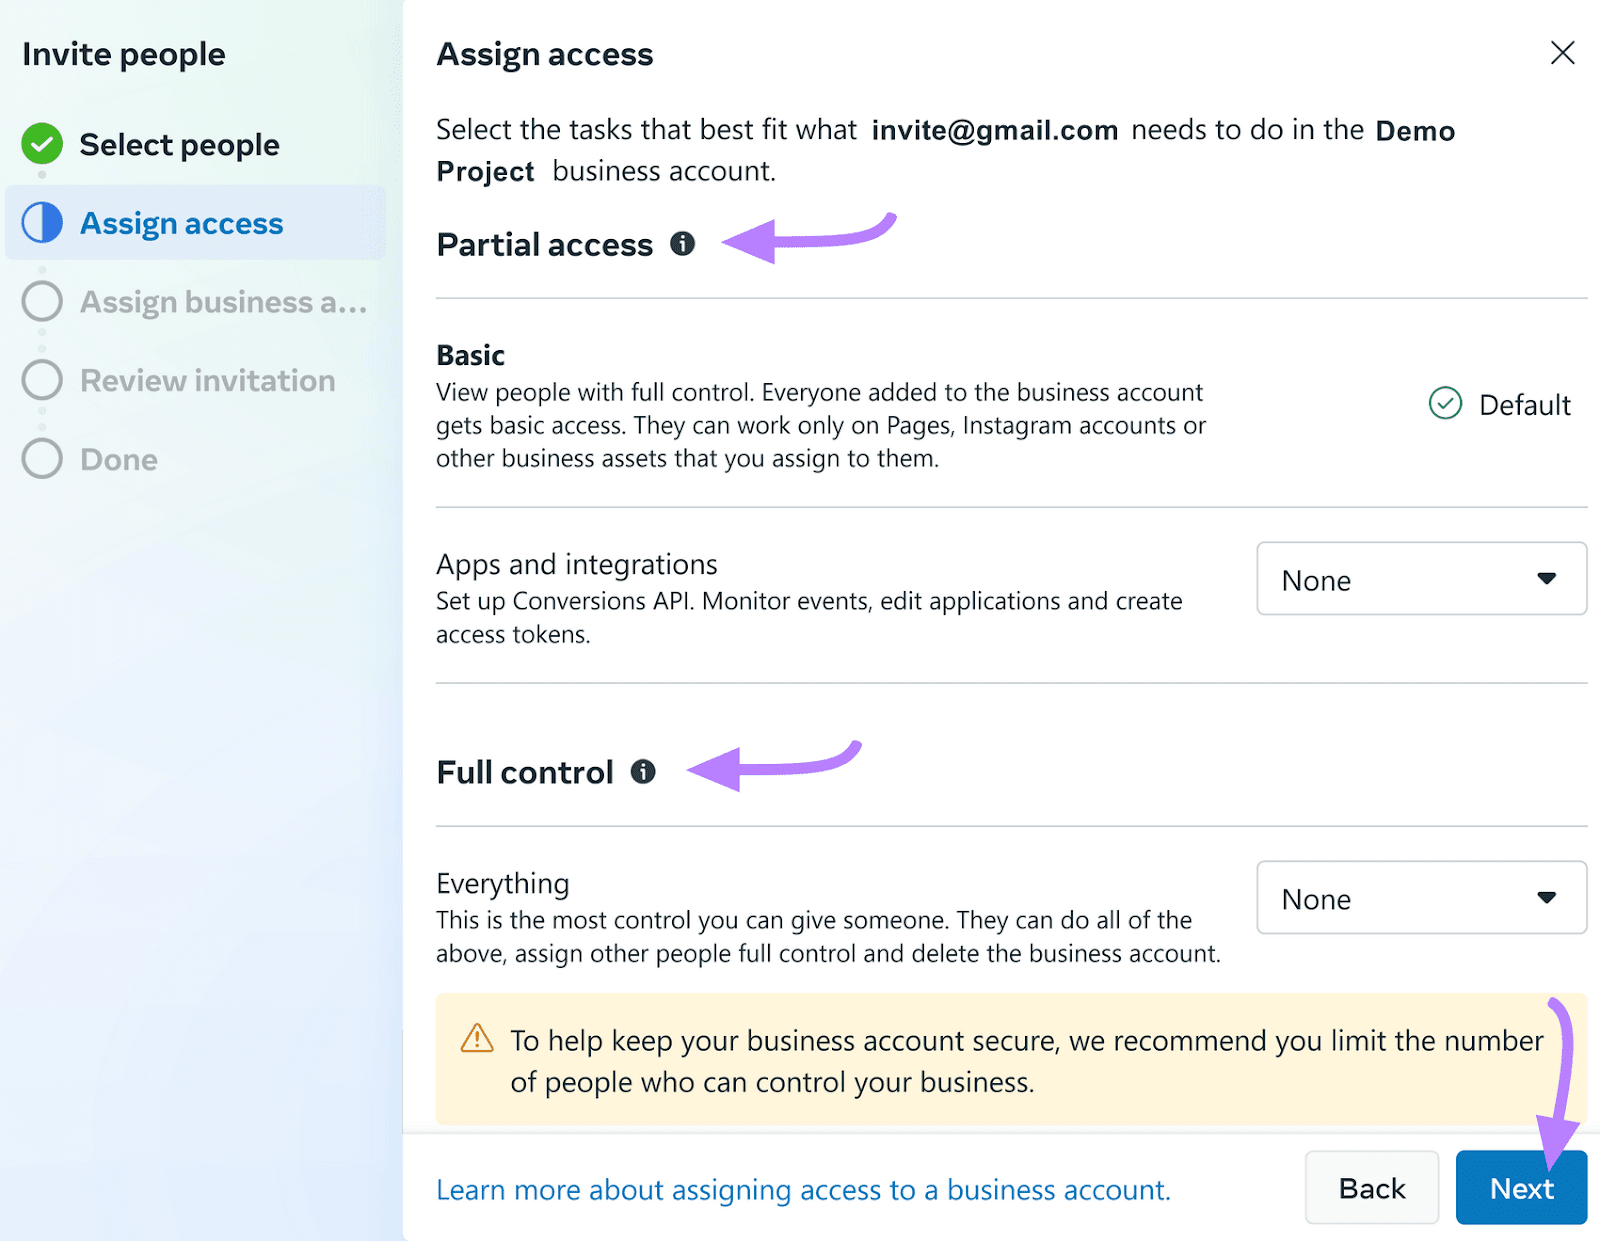 "Partial access," and "Full control" options highlighted under "Assign access" window